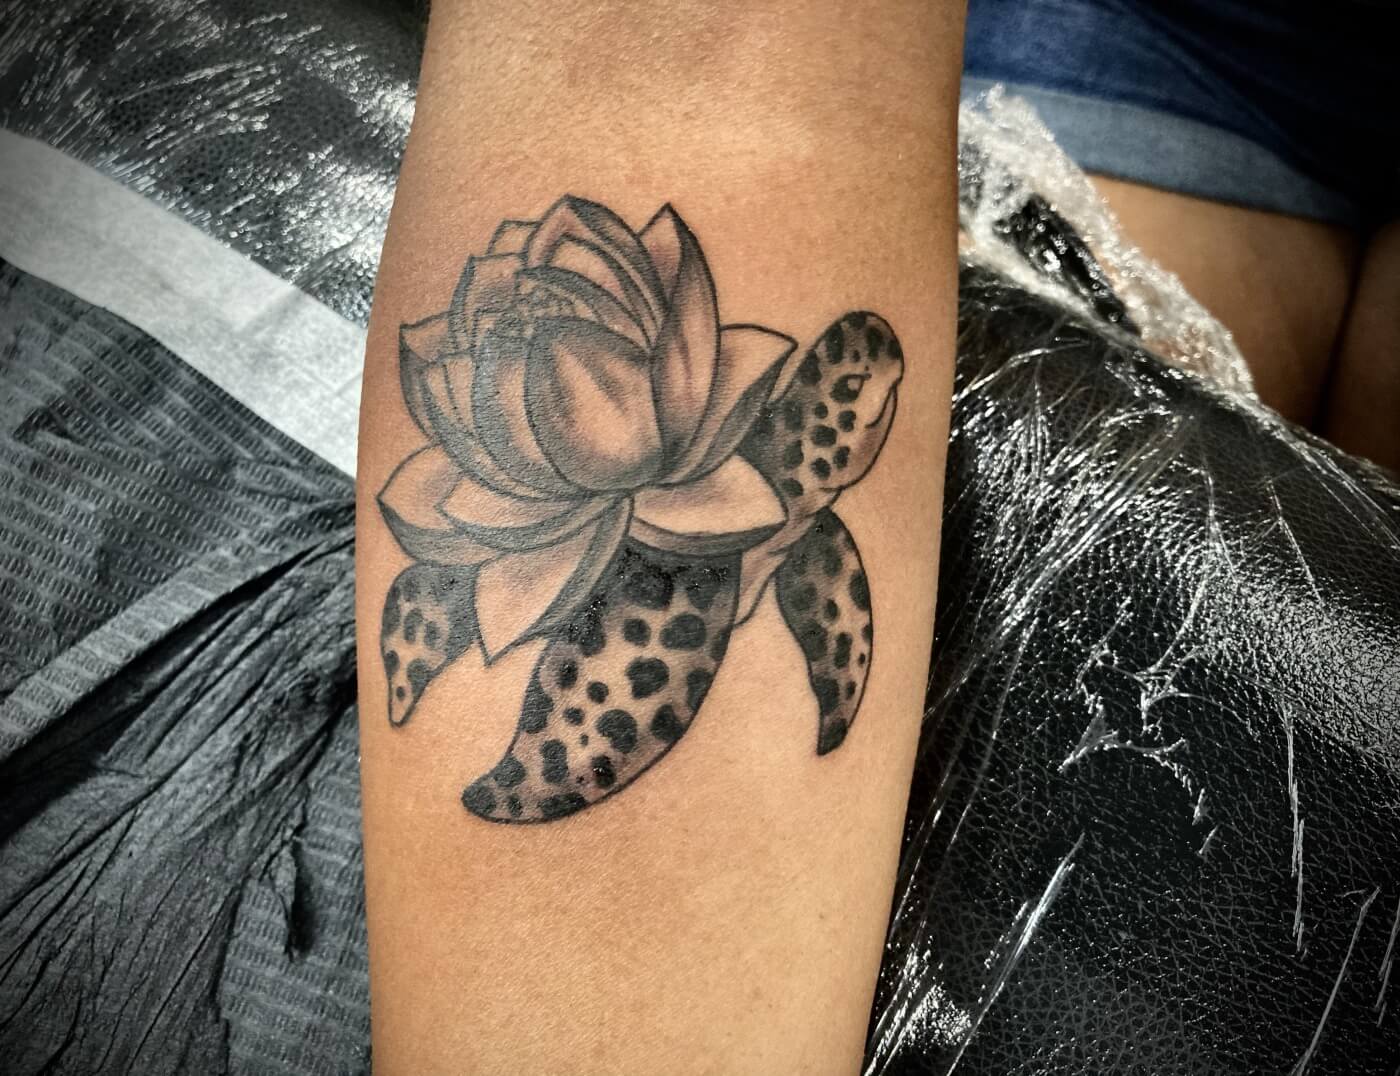 American Traditional Turtle With Lotus Shell In Black & Grey By Funk Tha World. At Iron Palm Tattoos. Call 404-973-7828 or stop by for a free consultation. Walk Ins are welcome.